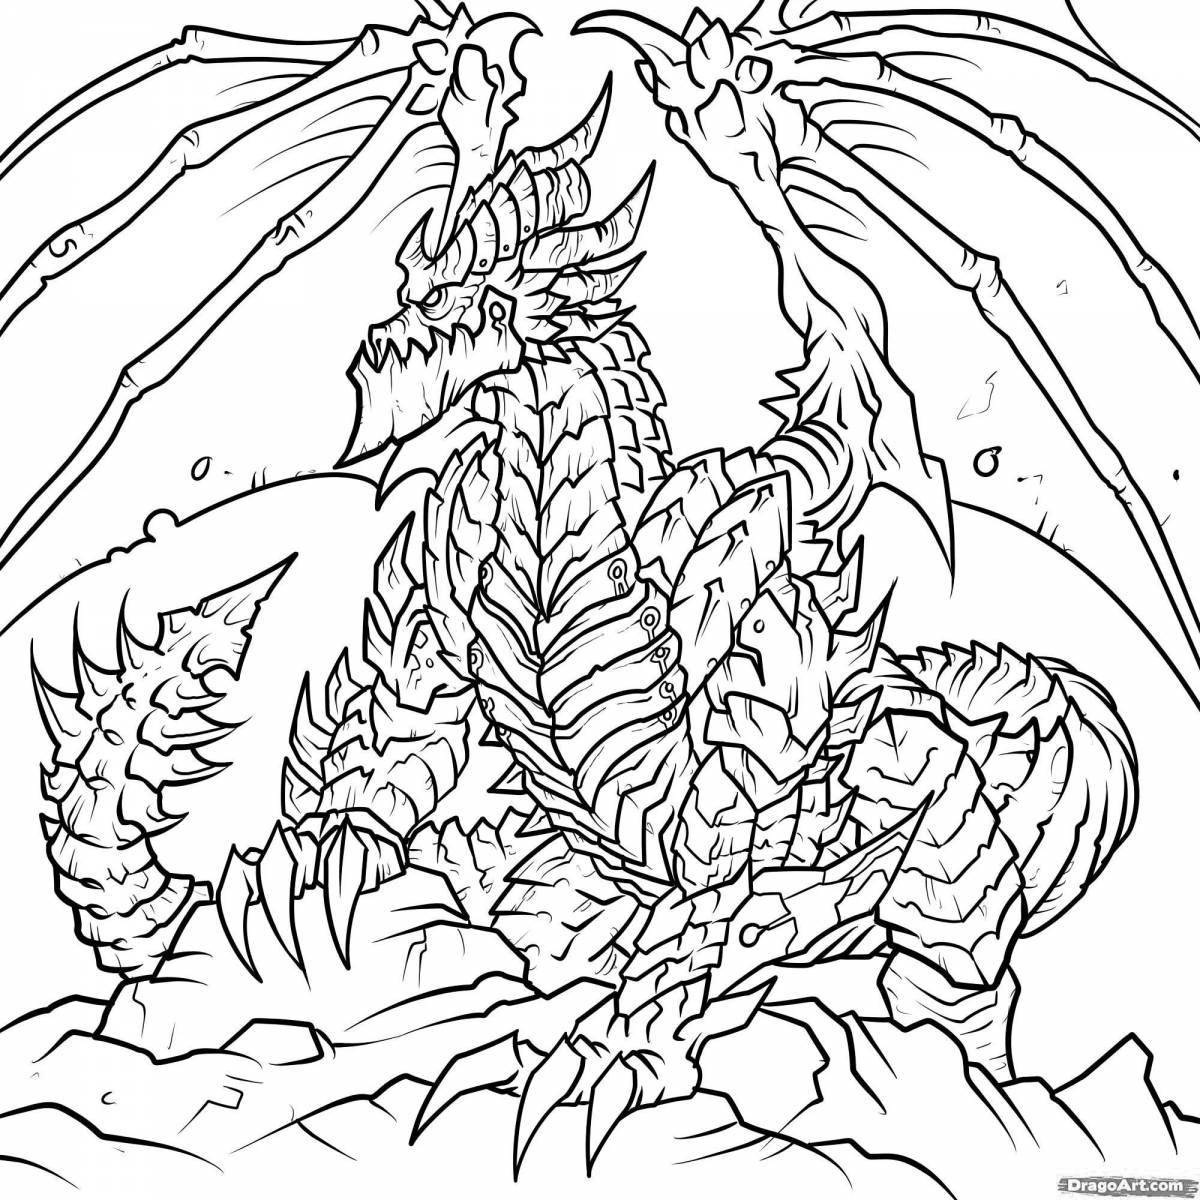 Intriguing world of warcraft coloring book